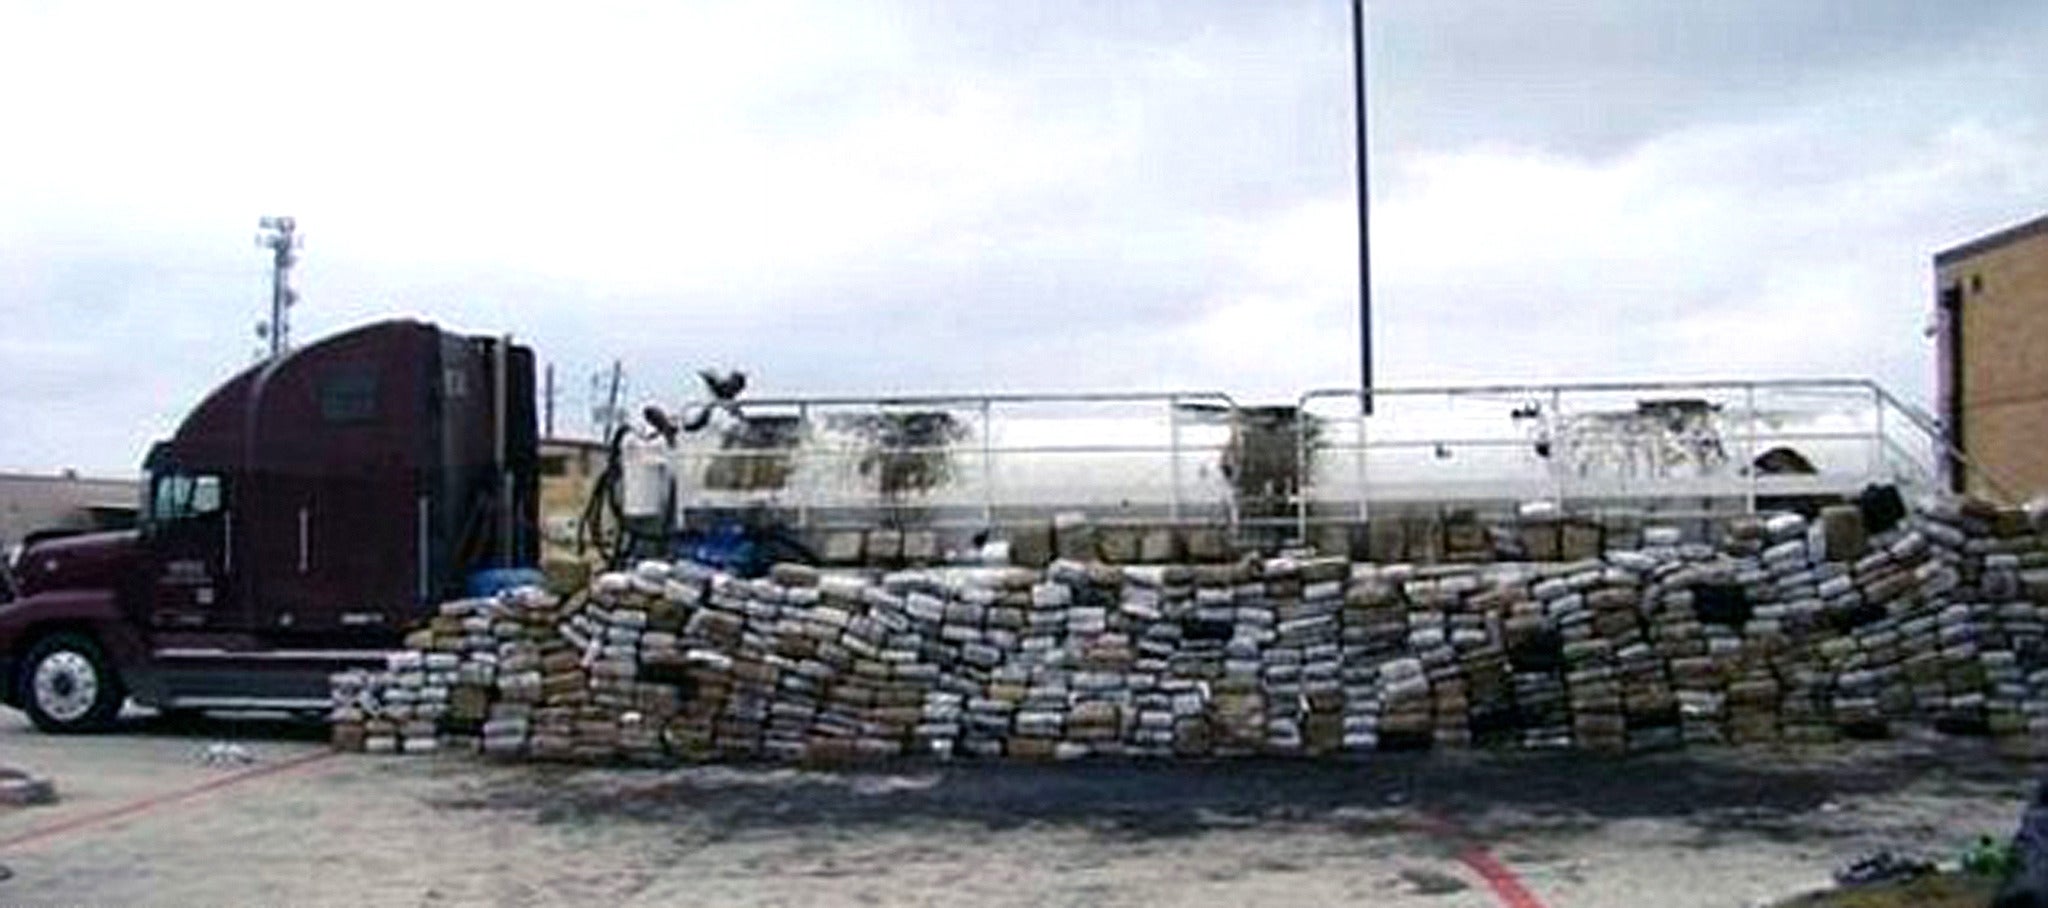 The marijuana, which has an estimated street value of $3.4 million, was discovered by a trooper in San Patricio County, Texas, on Tuesday.